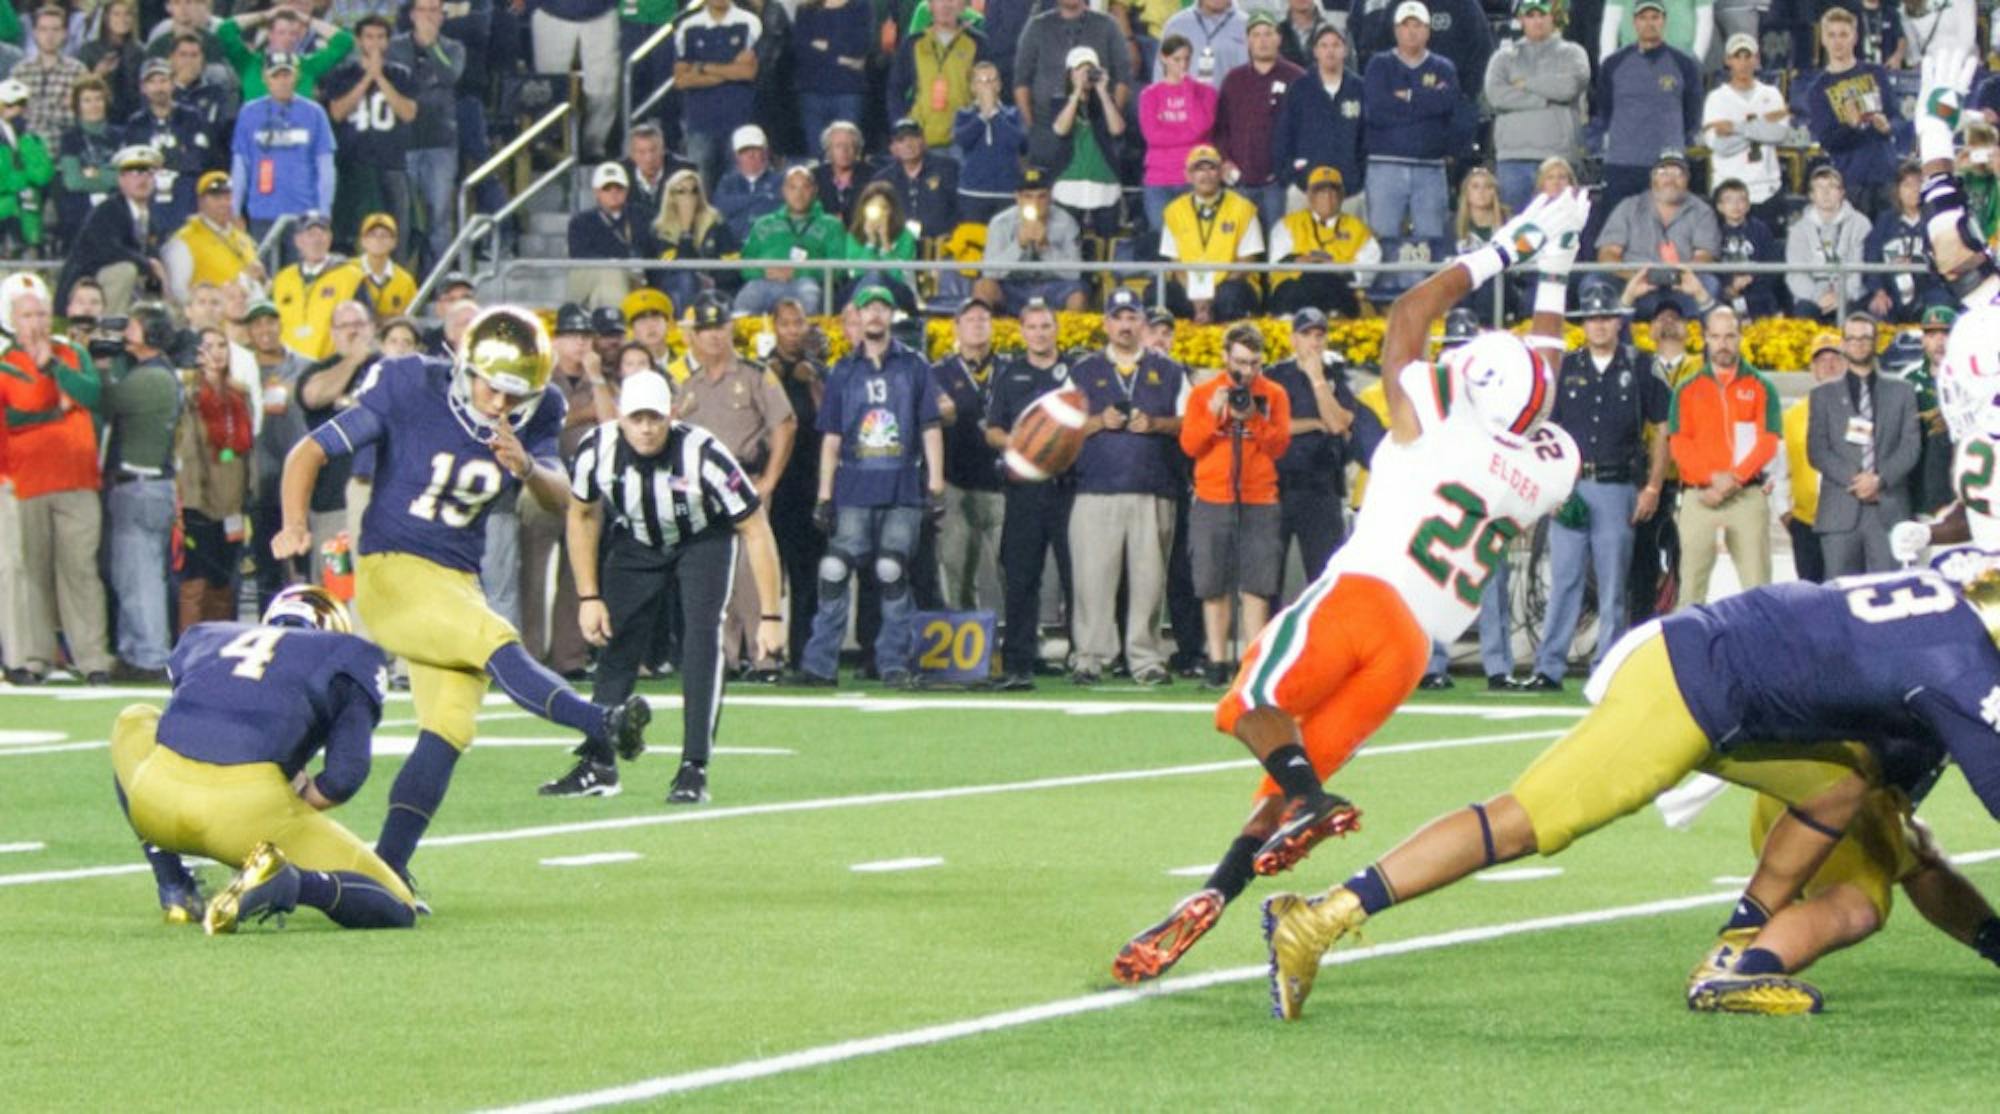 Irish sophomore kicker Justin Yoon gives Notre Dame the lead with just 30 seconds remaining.